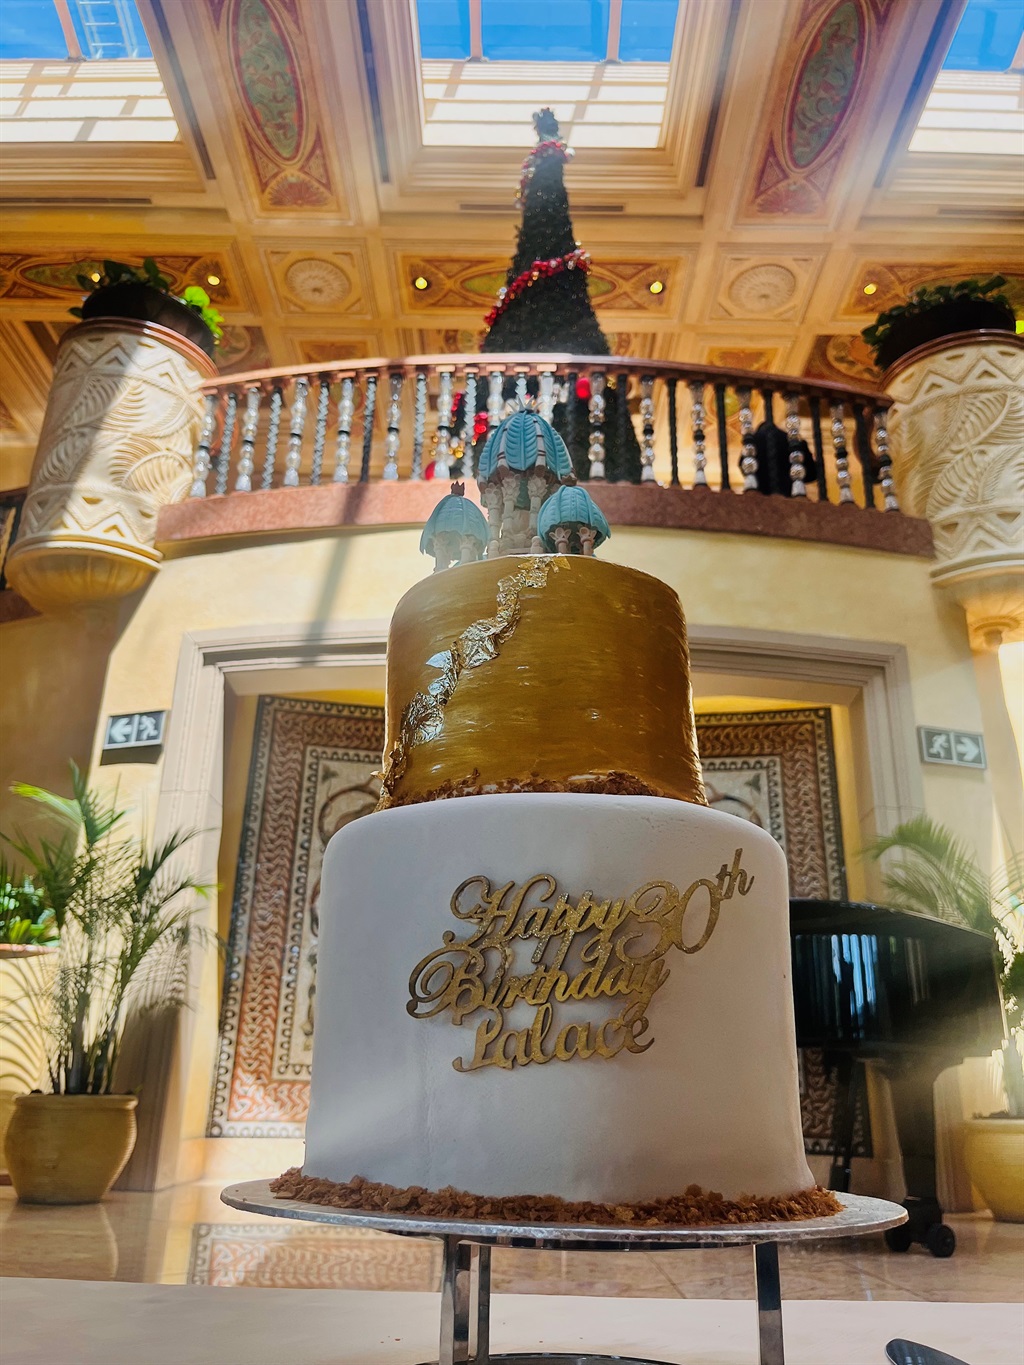 The cake, shaped like the design of the Palace hot